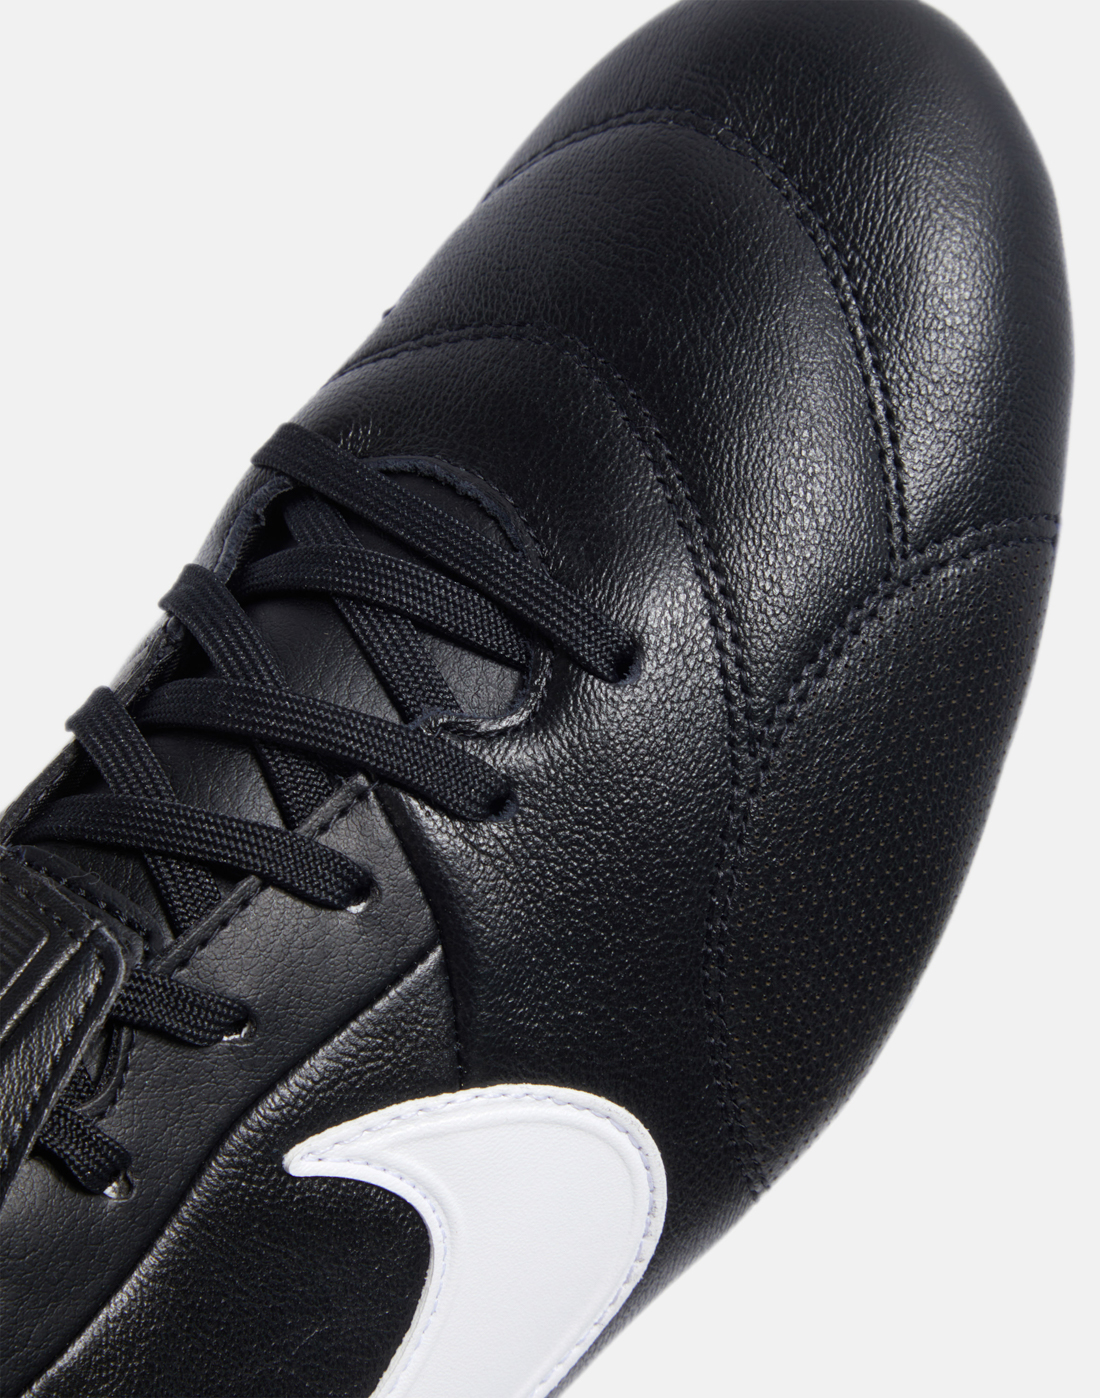 Nike Adults Premier III Firm Ground - Black | Life Style Sports IE